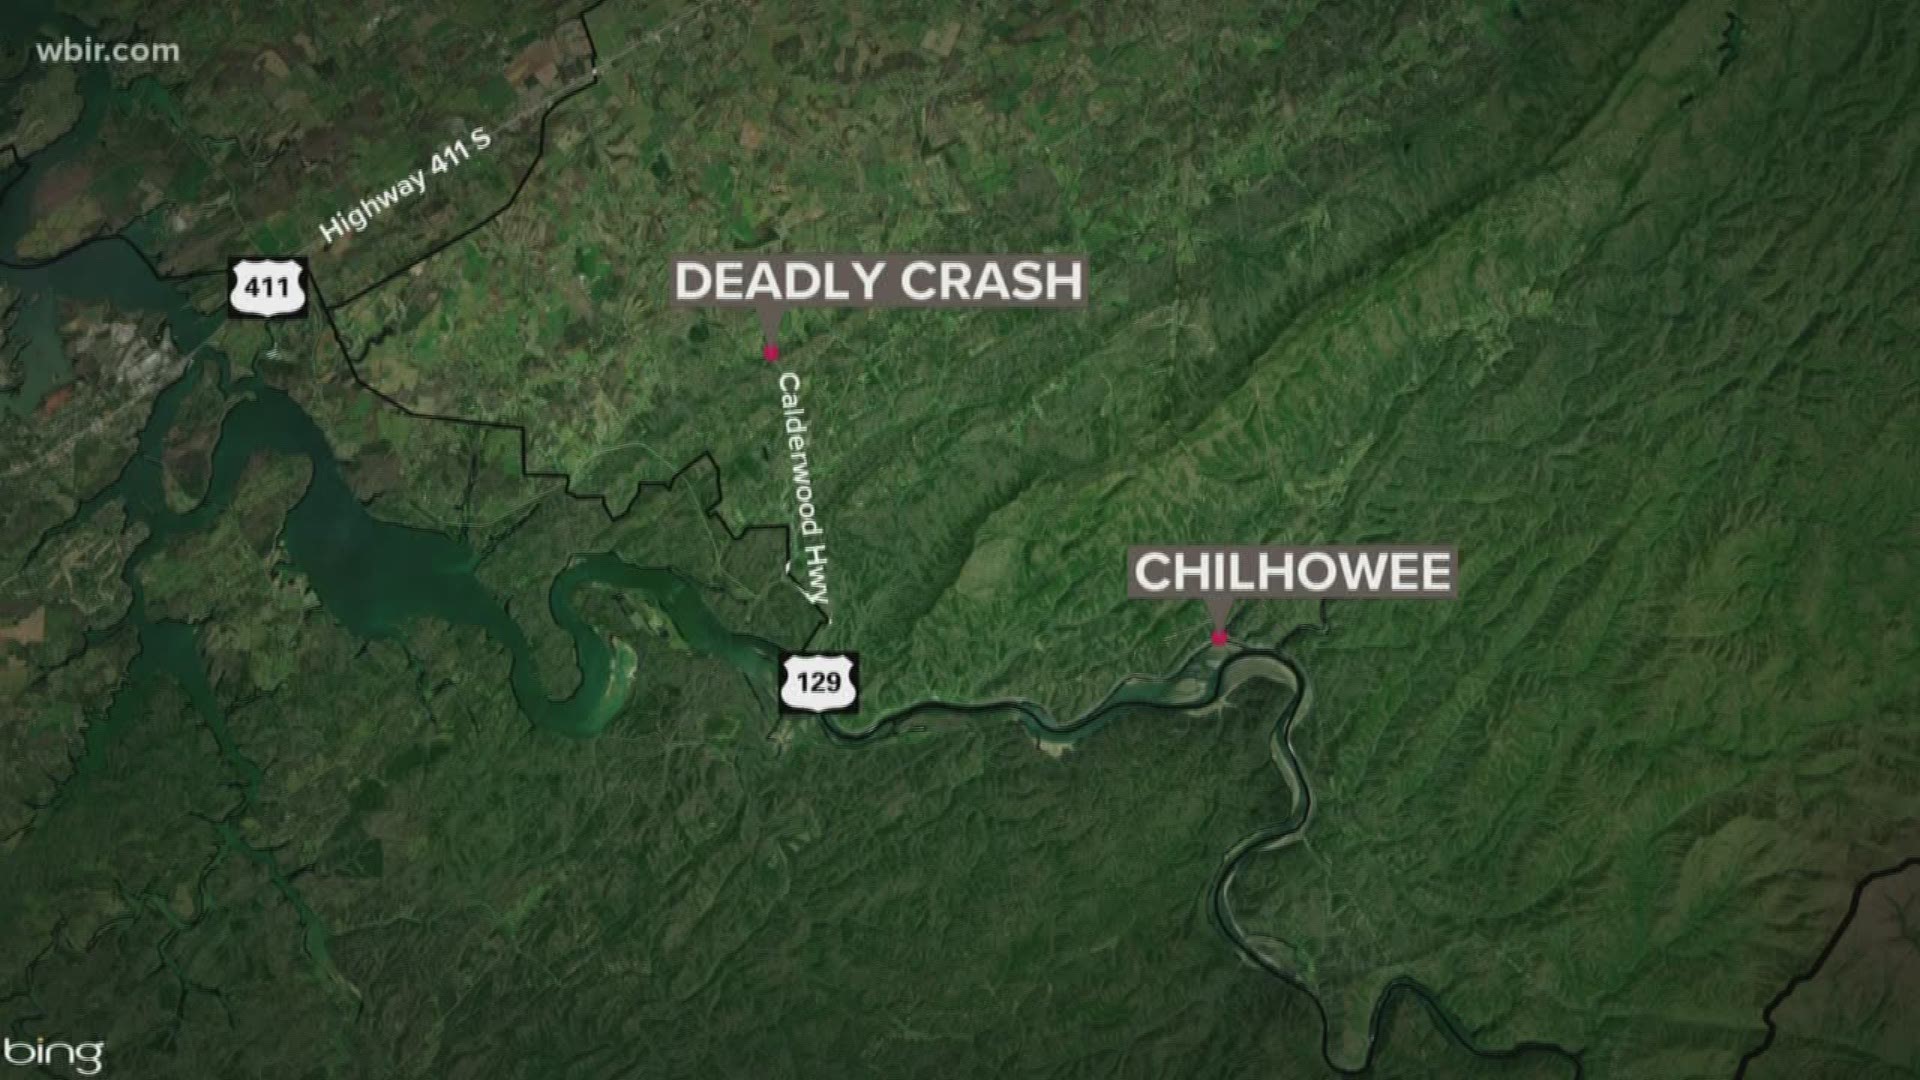 Authorities in Blount county say a Mississippi man died following a motorcycle crash.